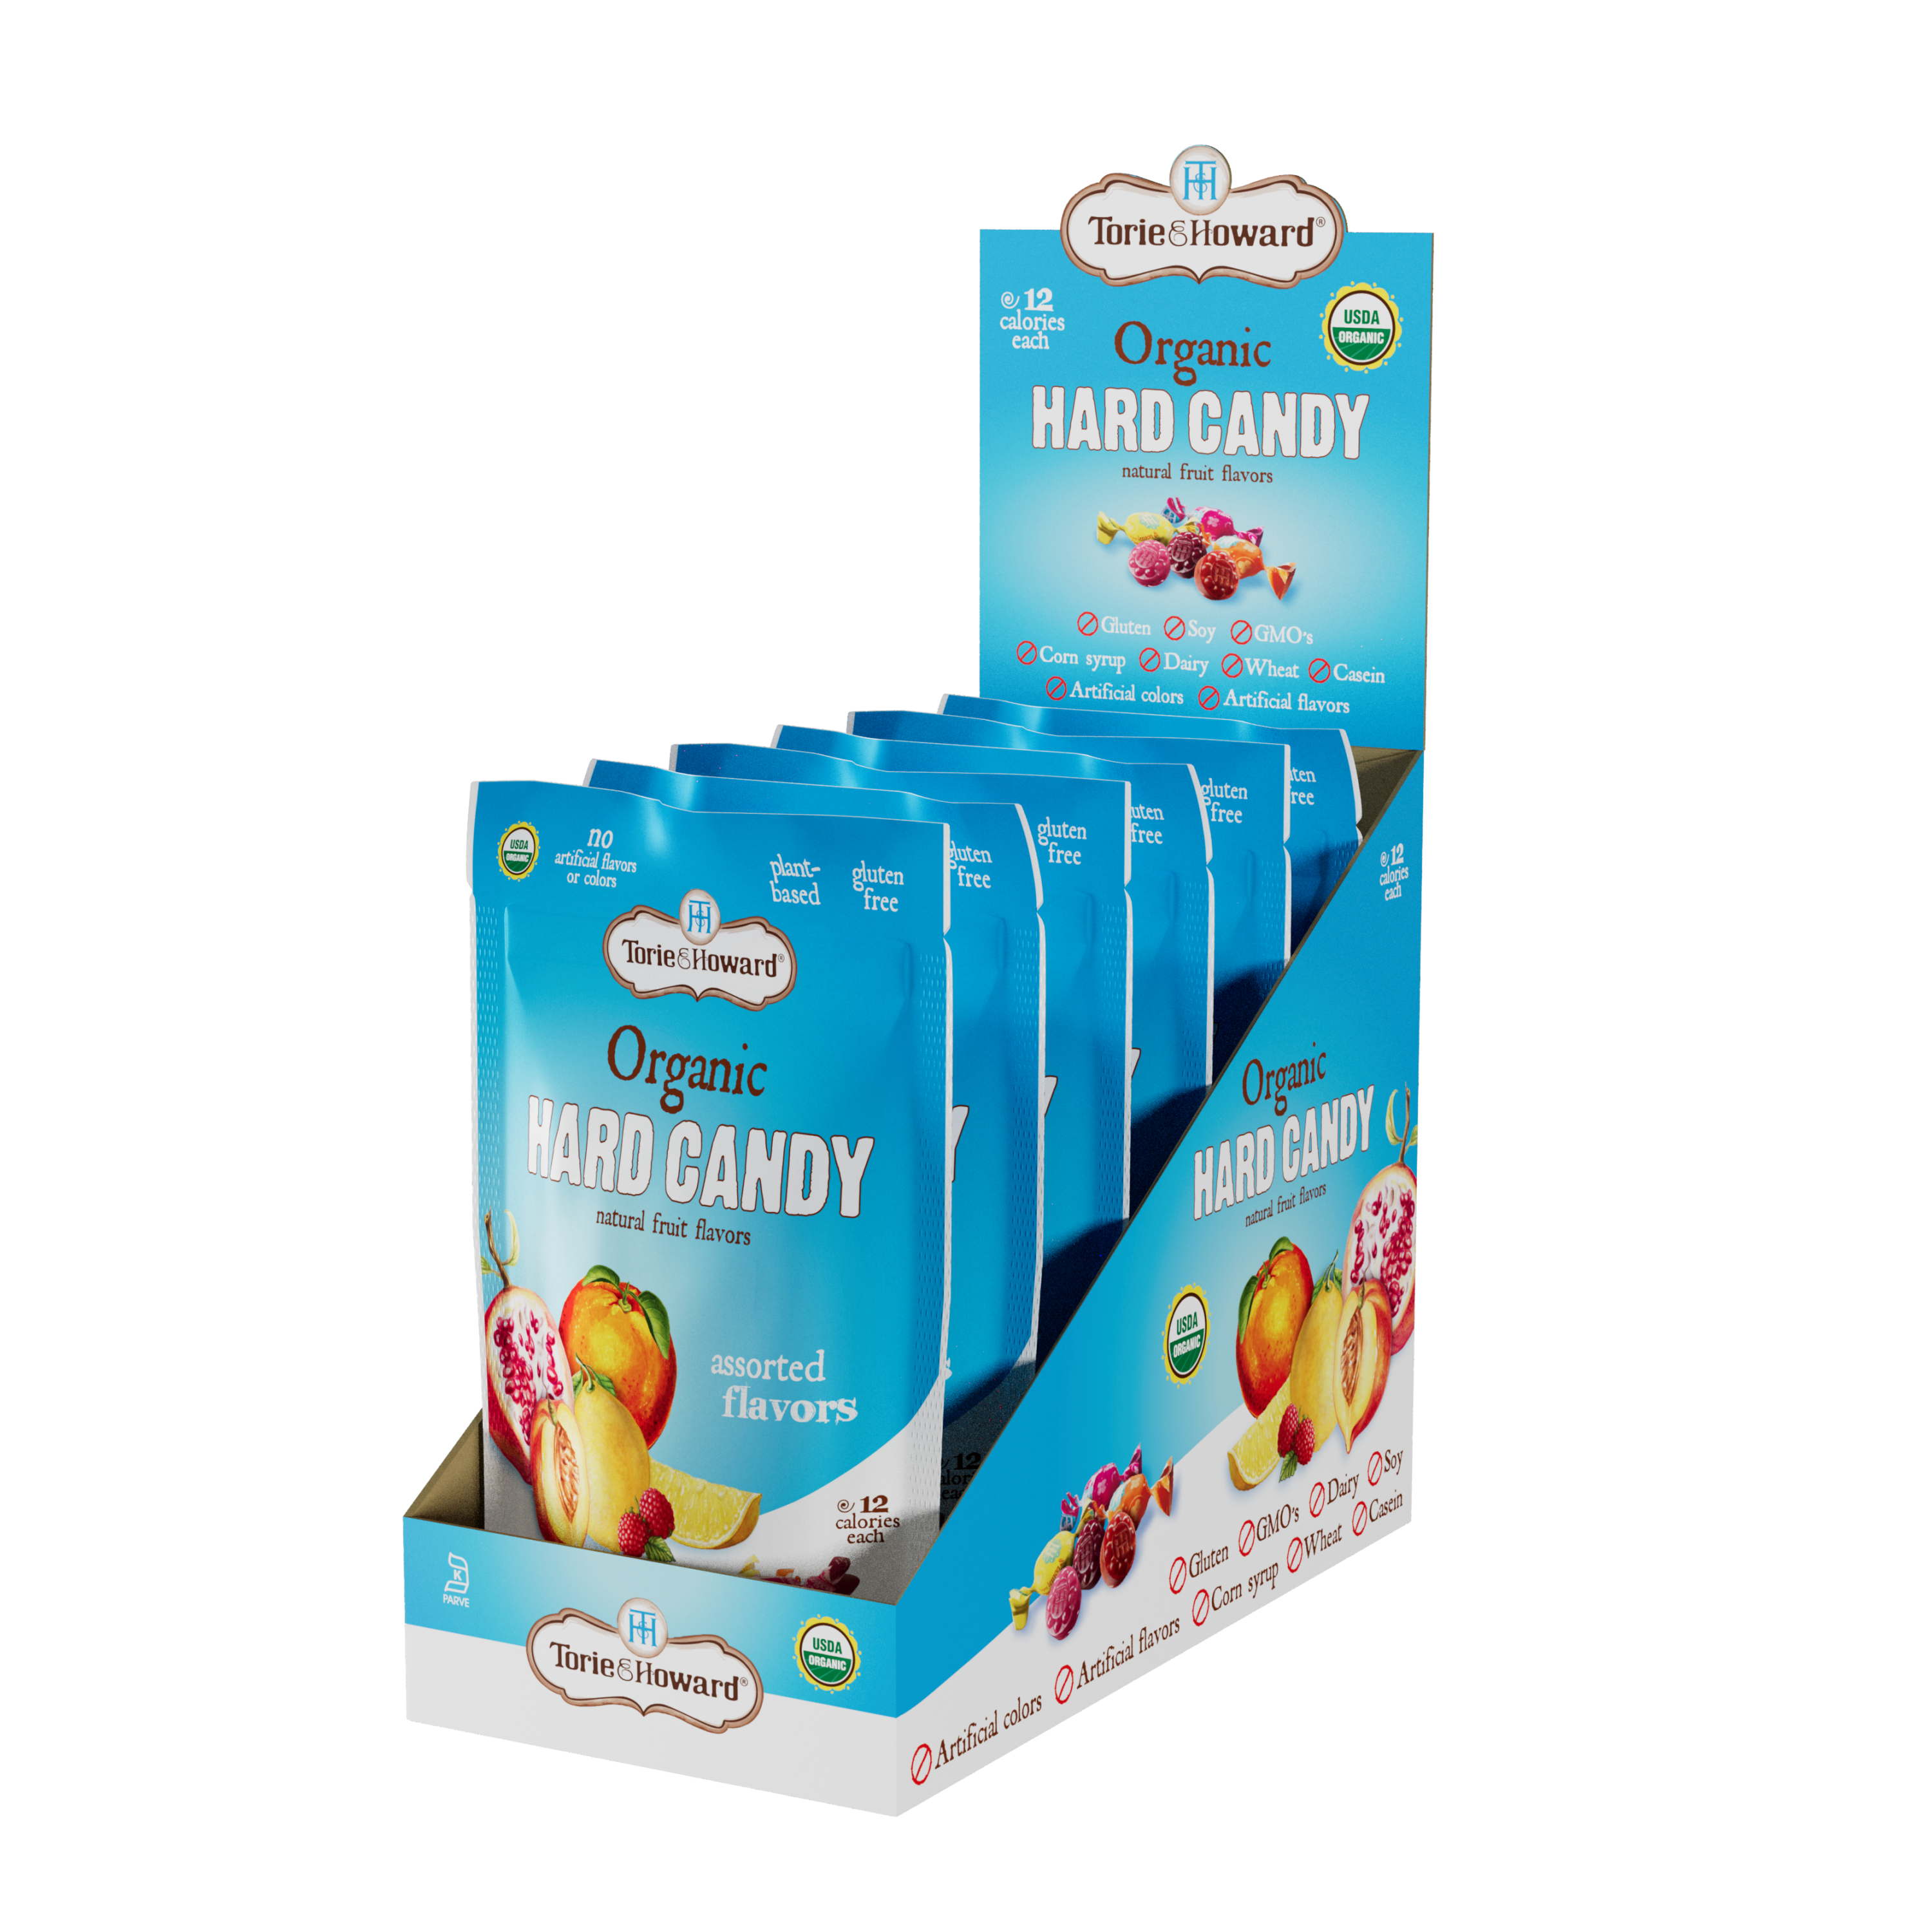 Torie & Howard Assorted Organic Hard Candy side view of 6-pack caddy